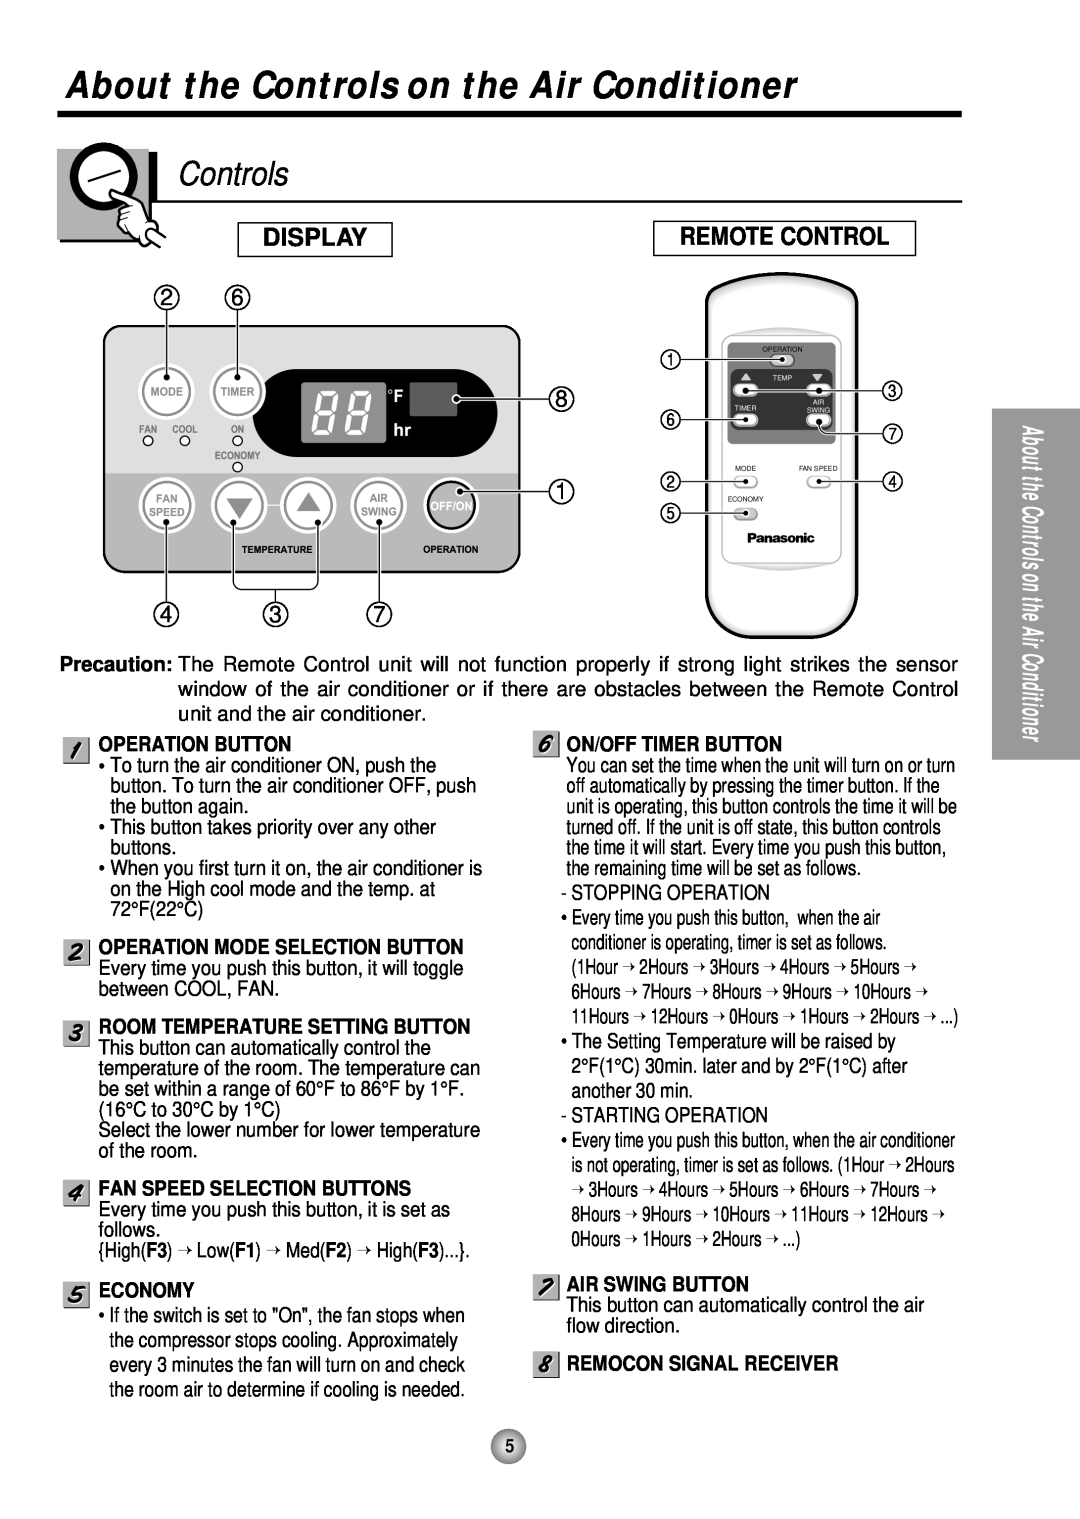 Panasonic CW-XC243HU manual About the Controls on the Air Conditioner, Display, Remote Control, Operation Button, Economy 